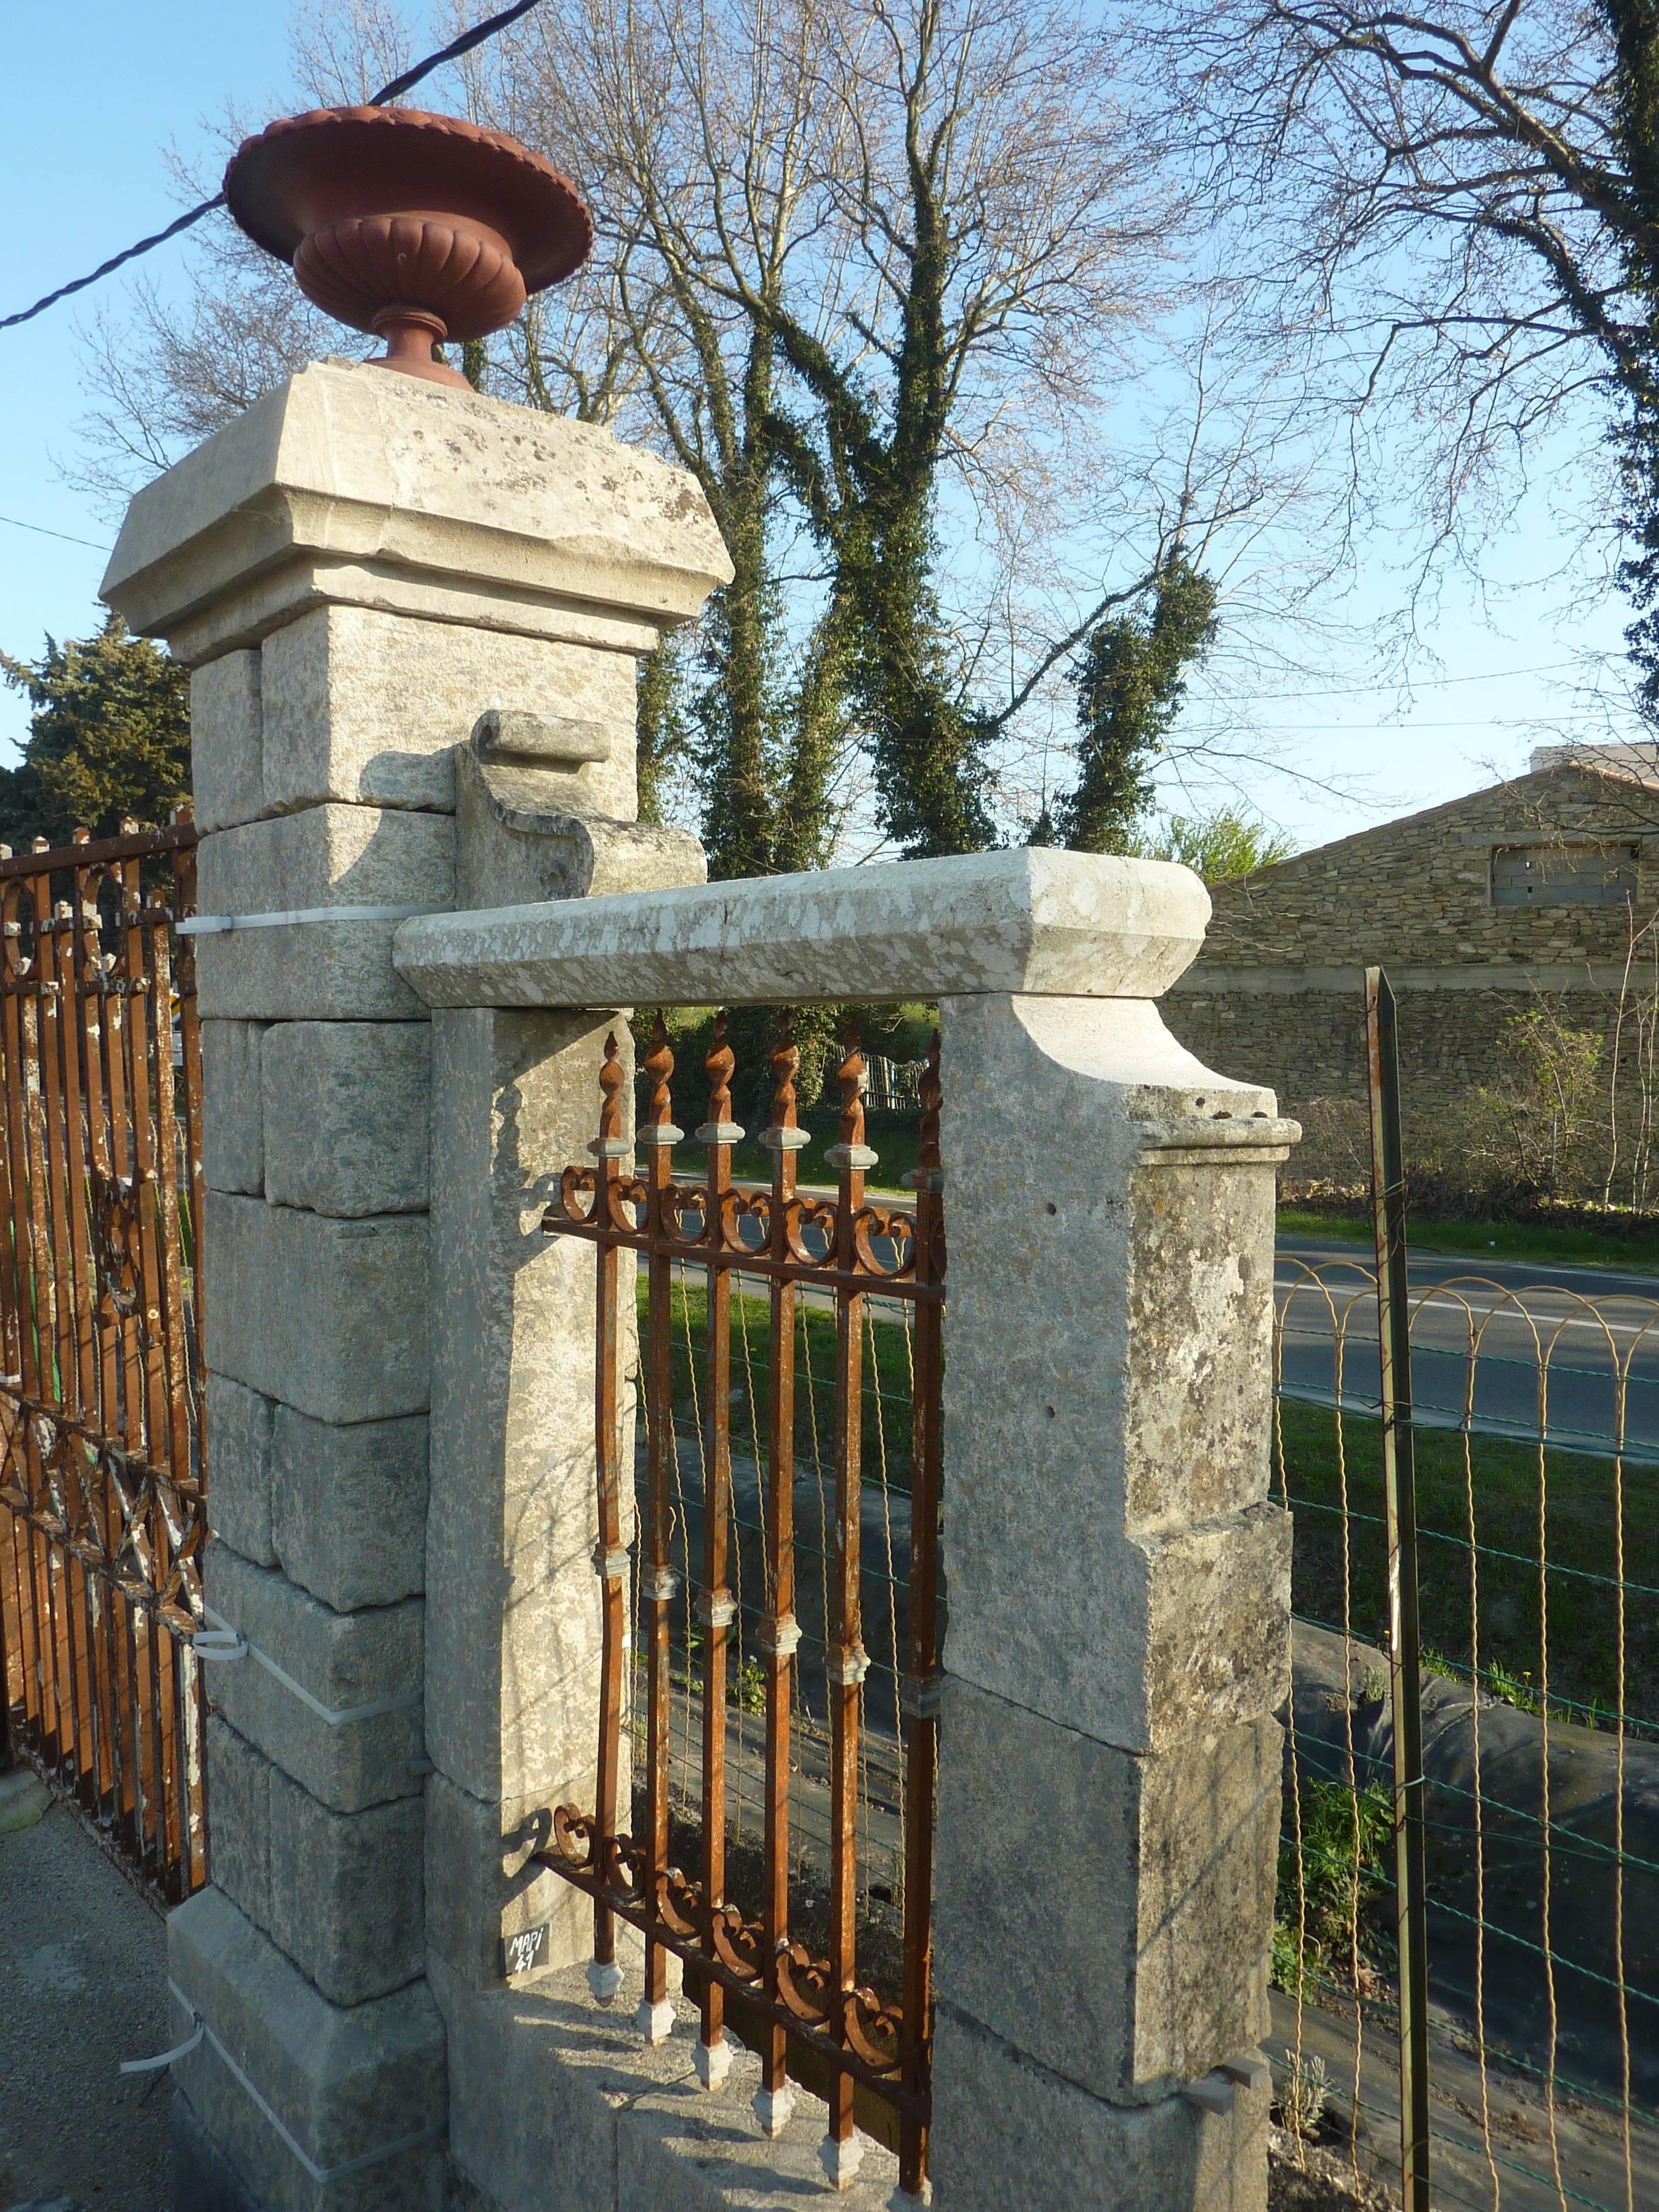 This pair of gate pillars in stone is flanked by long and thin stone low-walls. Each of these elegant pillars is topped by a lovely antique cast iron Medicis vase. This set features two side wrought iron grids animated with volutes and twists.
The